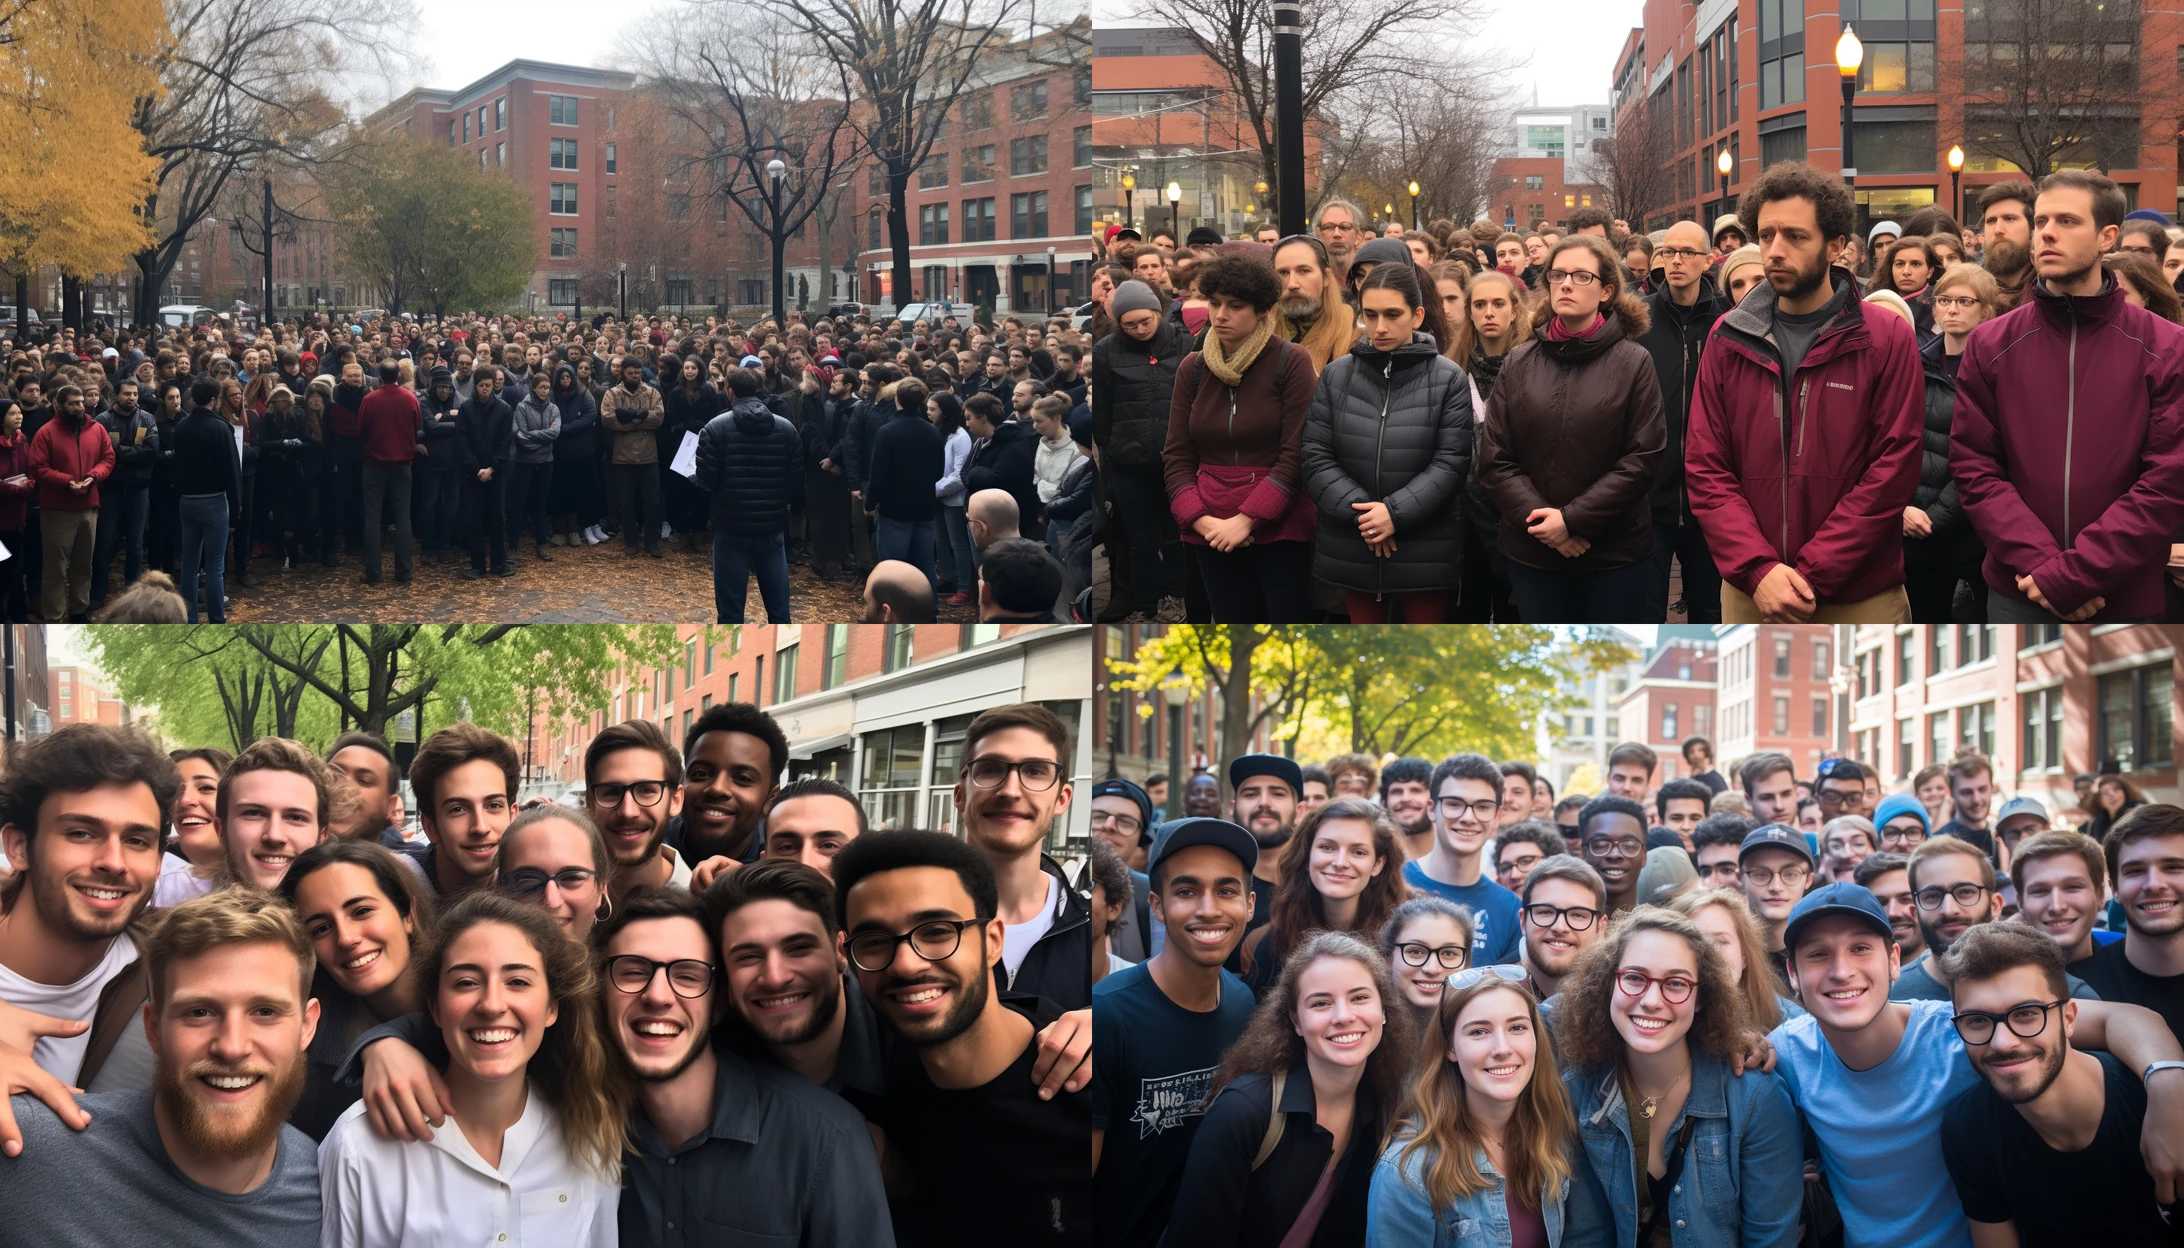 An image capturing a diverse group of MIT alumni gathering together to express their concern and support for the safety of Jewish and Israeli students. [Photo prompt]